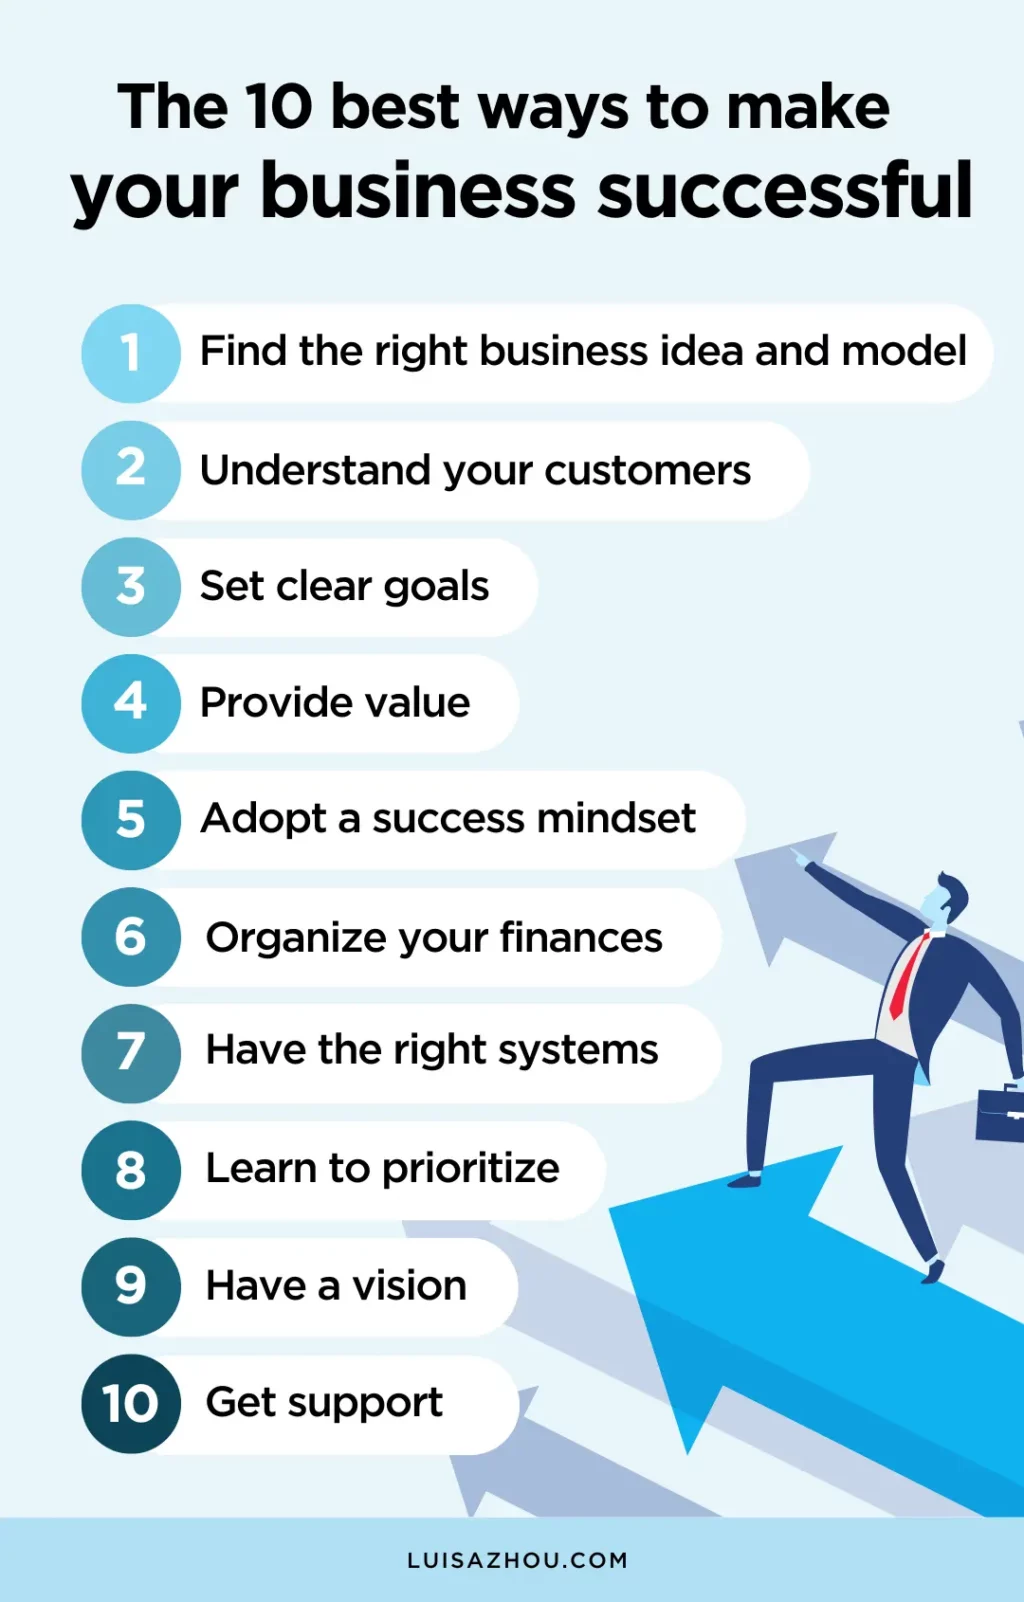 The 10 Best ways to make your business successful